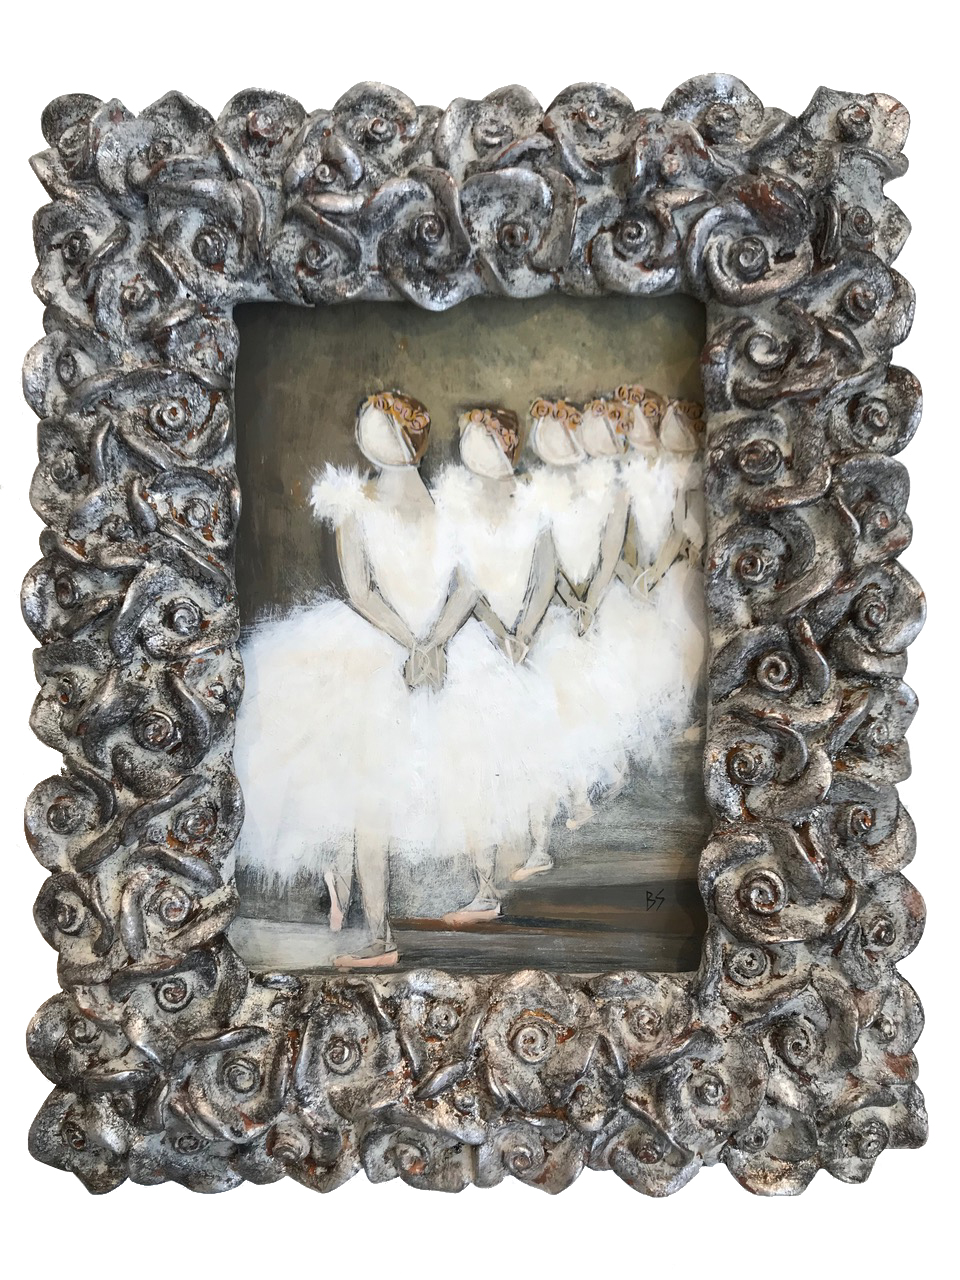 MINIATURE 'Moonlit Stage Trio’ Gouache & Acrylic on Board In Silver Leaf with Antique Finish Oval Laurel Wreath Frame